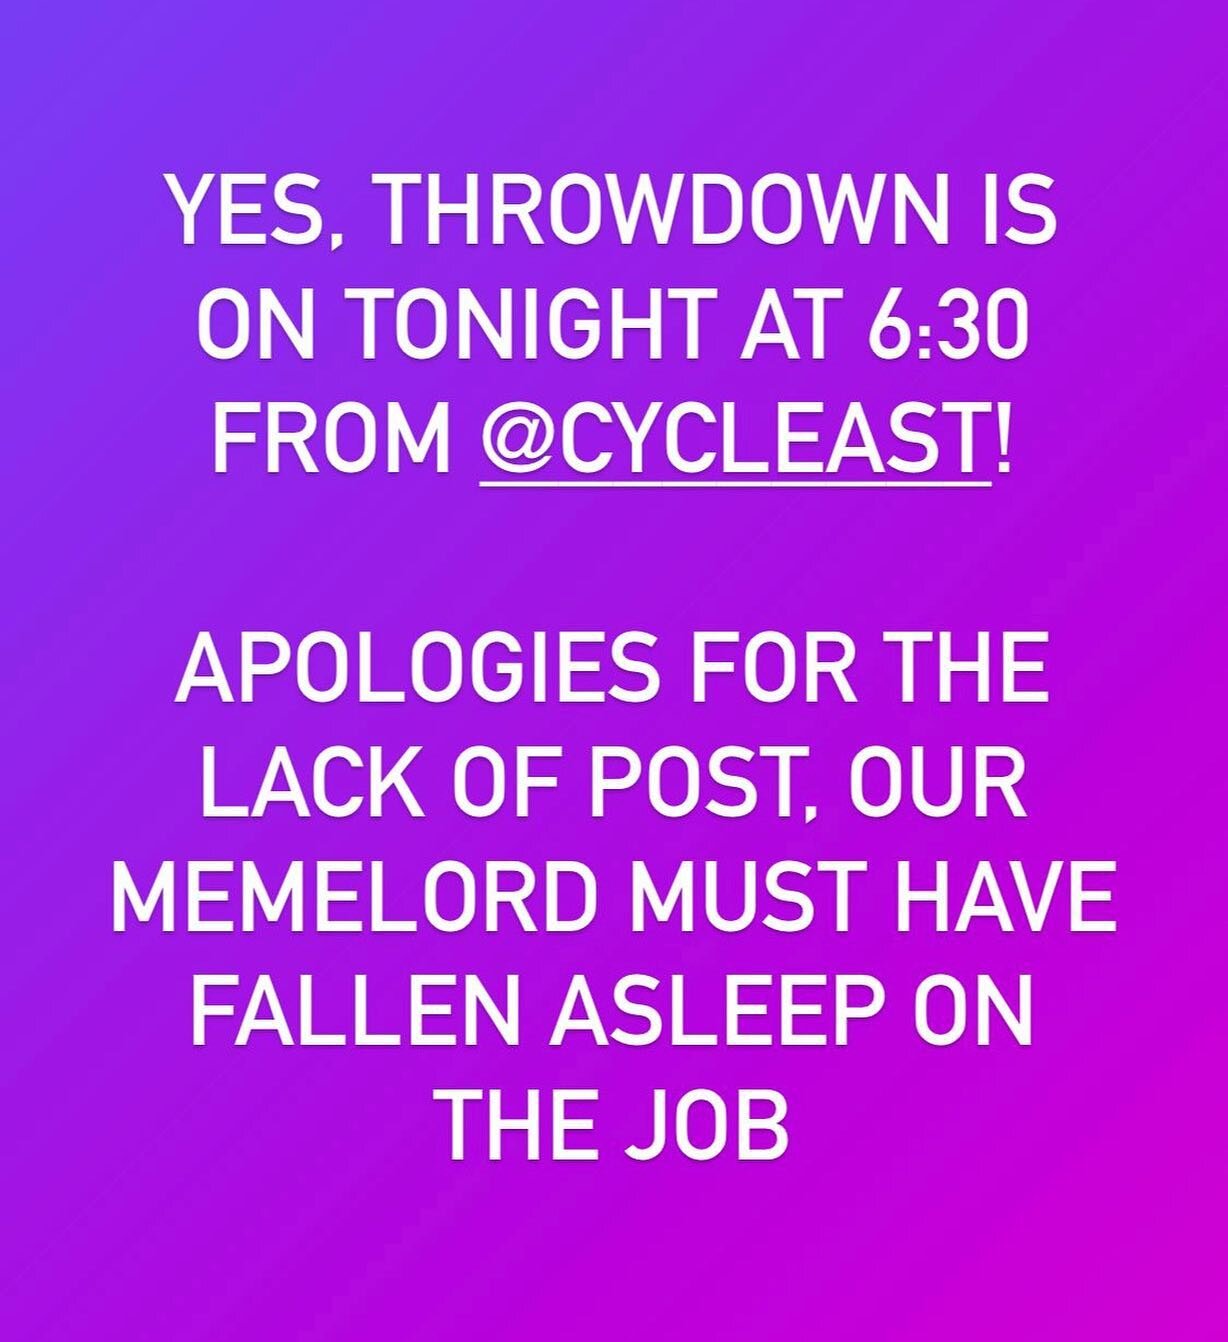 That dang ol&rsquo; Memelord of ours is a funny person and all but sometimes even a Memelord messes up. Anywho, usual deets for Throwdown! Wheels down from @cycleast at 6:30pm, meet up at Crown &amp; Anchor for post ride hangs. Bring every blinky lig